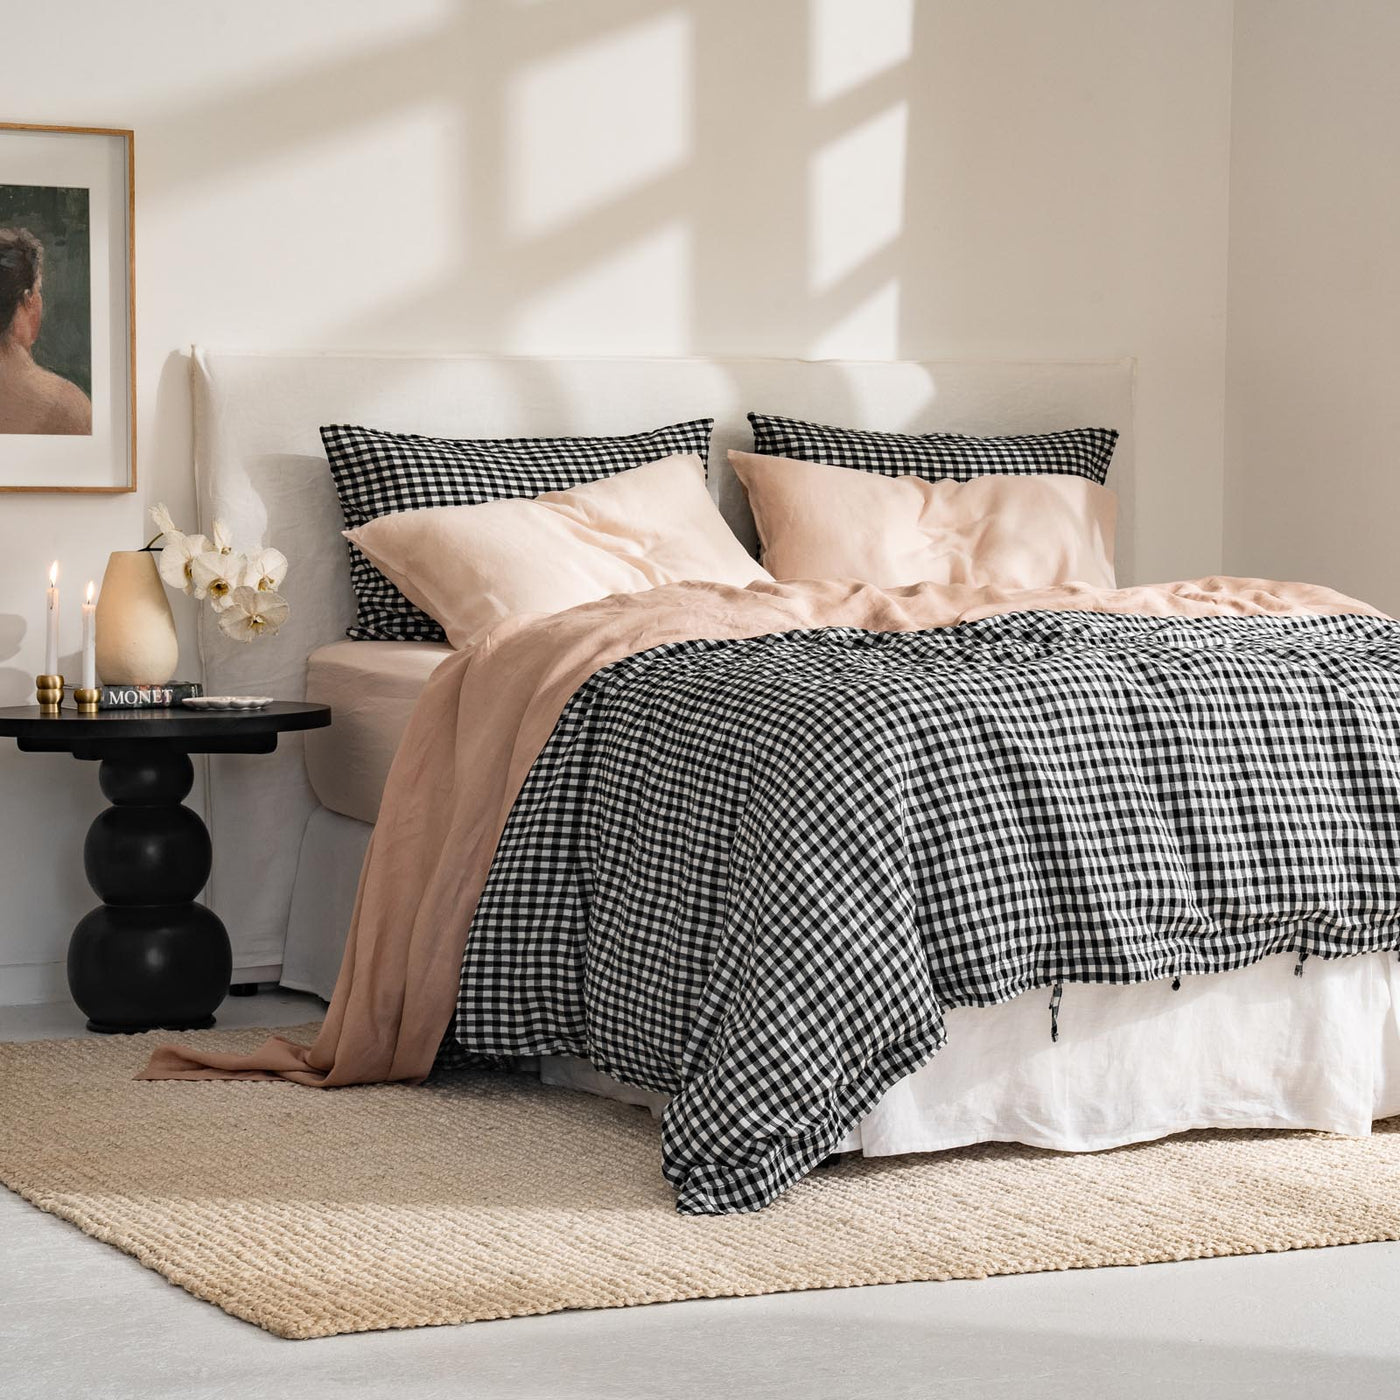 French Flax Linen Quilt Cover in Charcoal Gingham